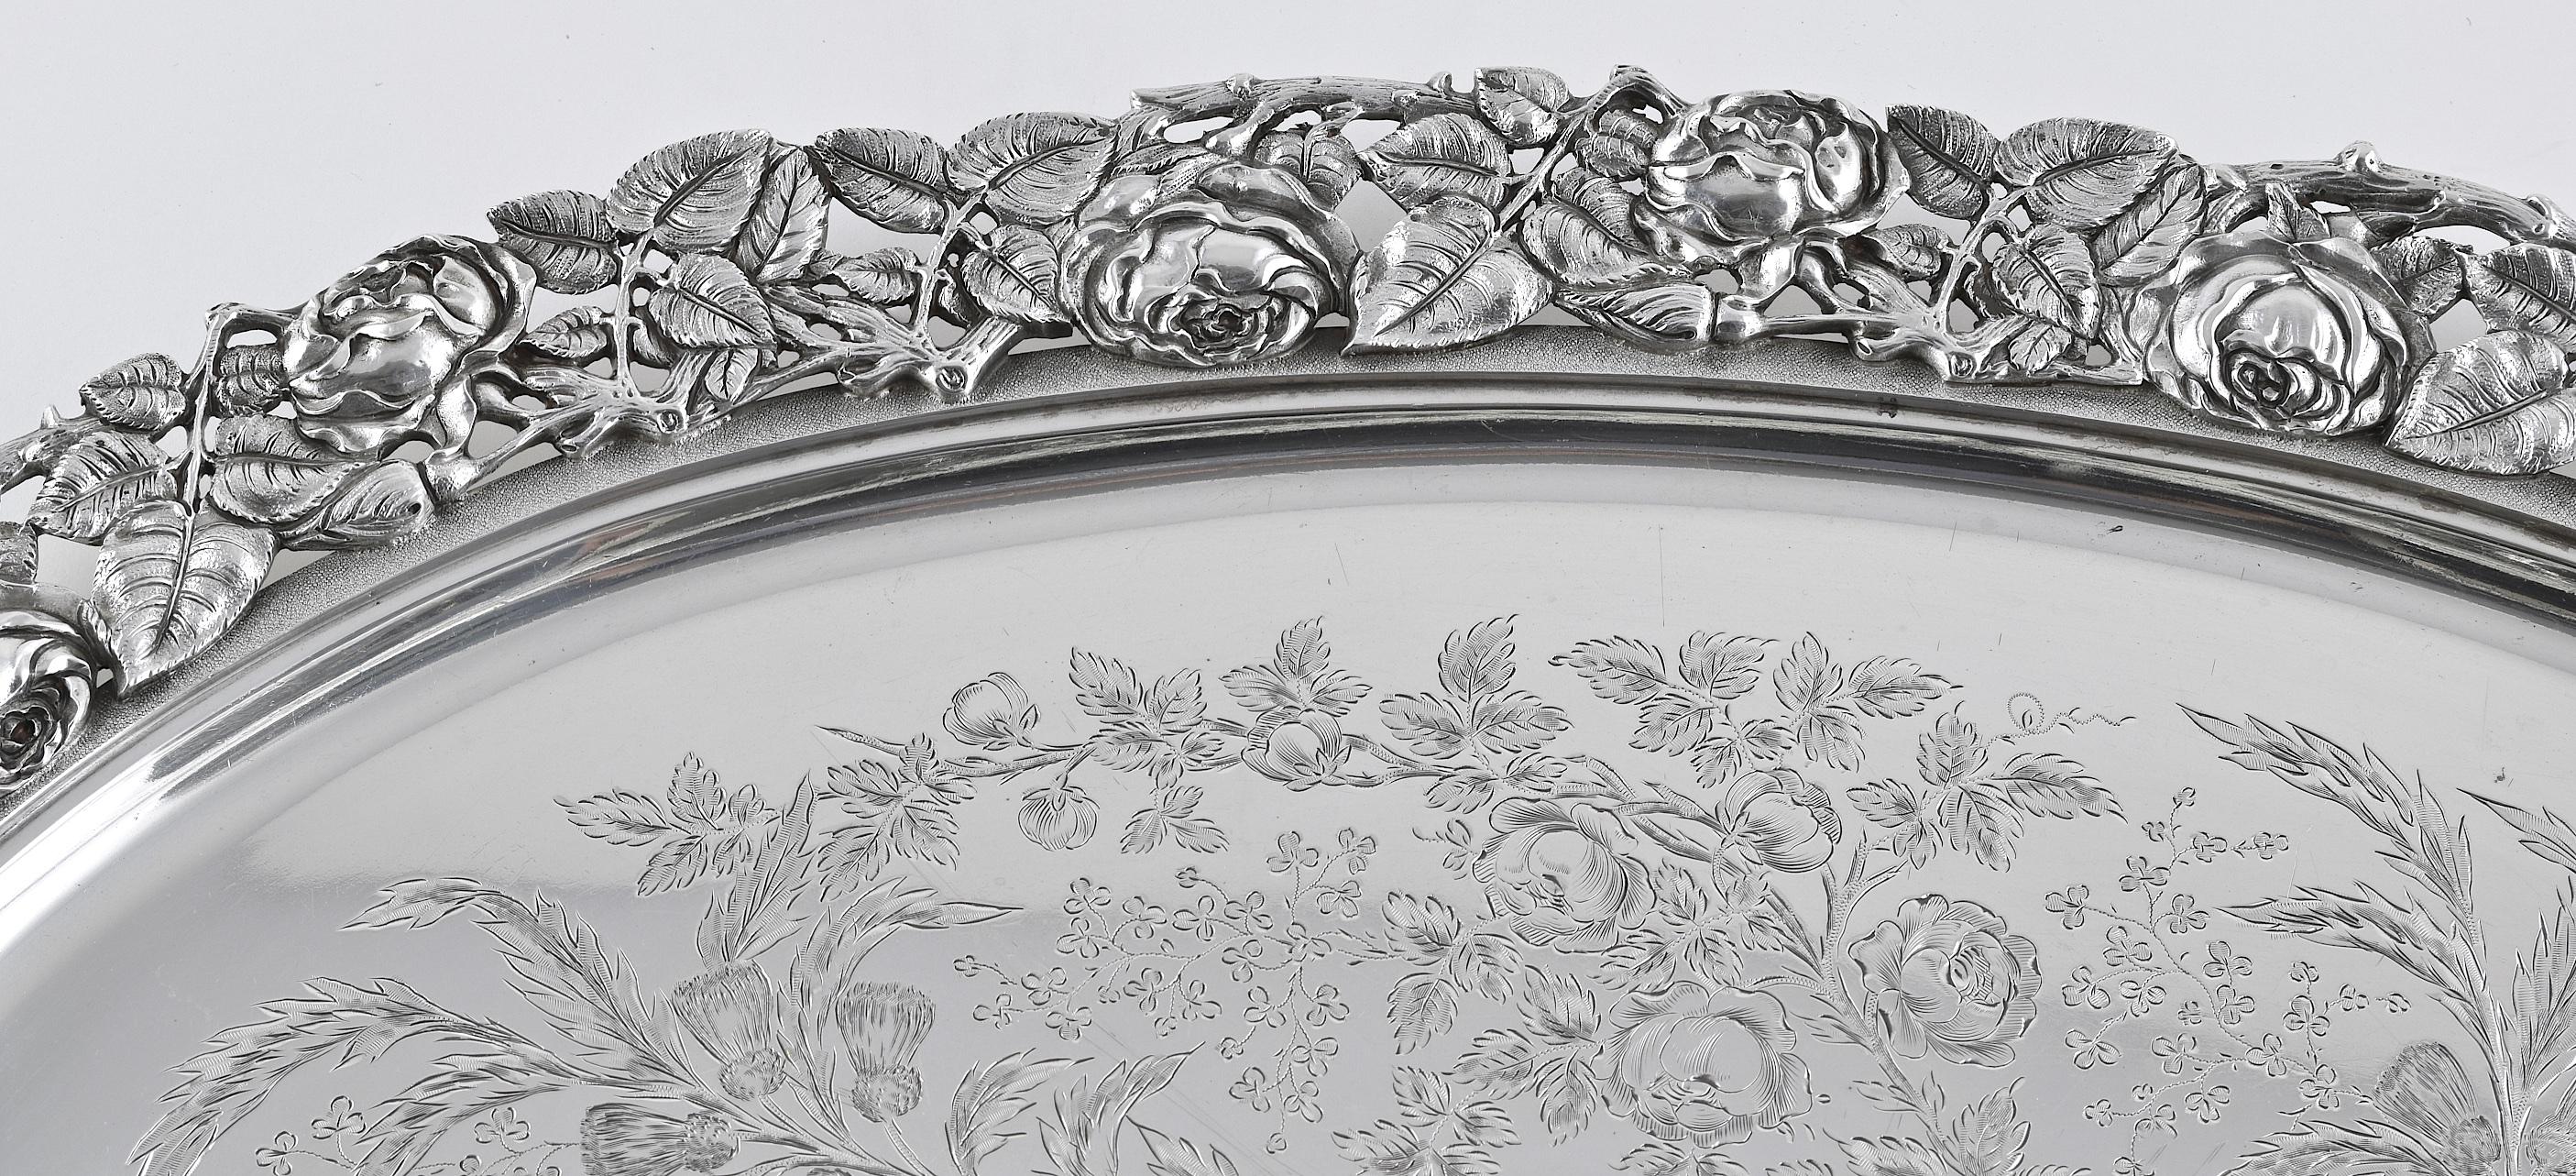 Cast An Impressive & heavy quality sterling silver tray